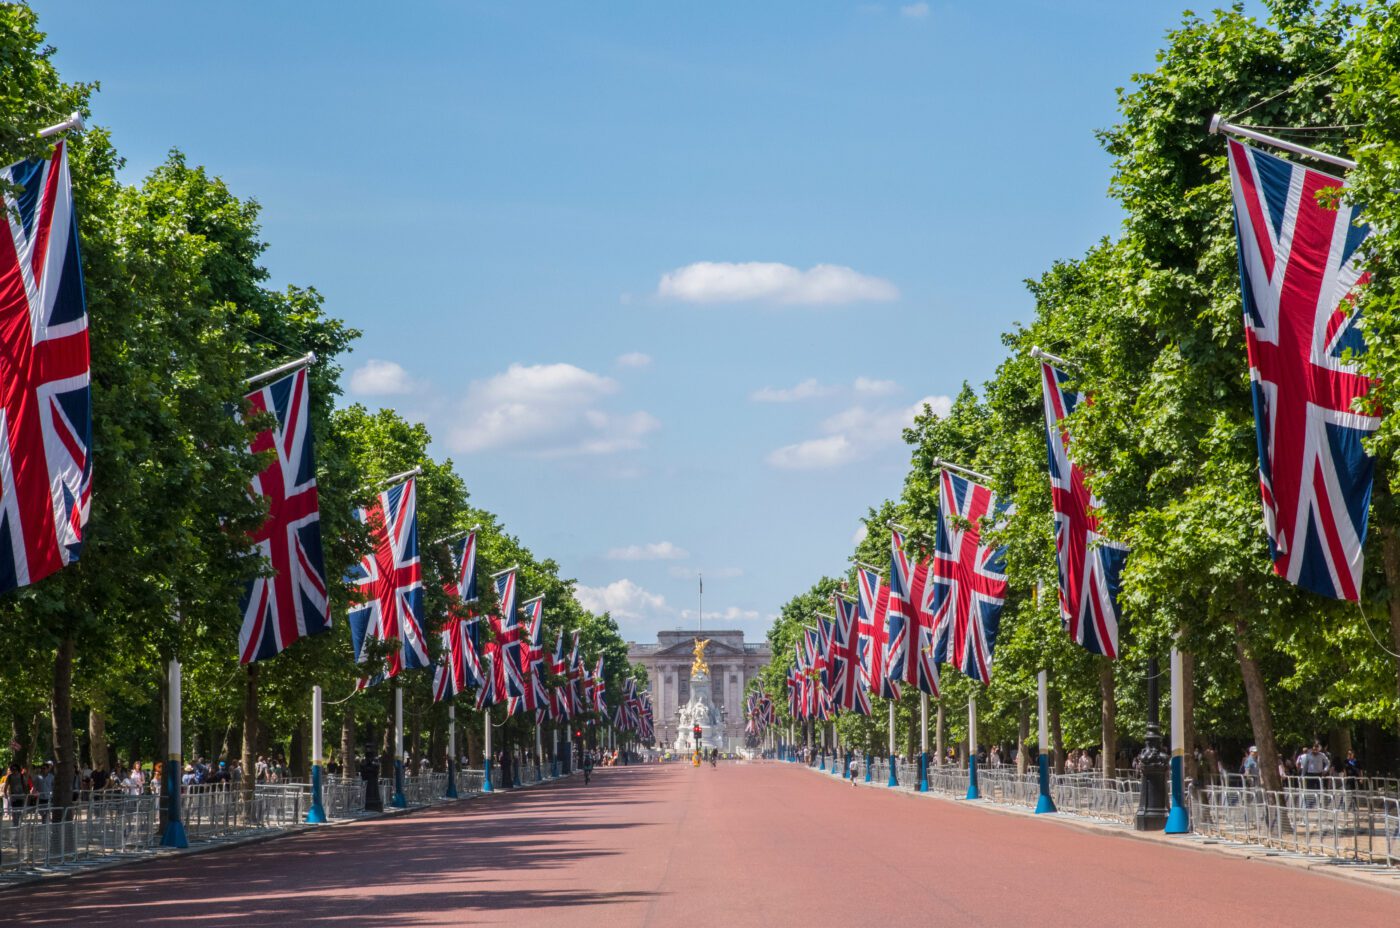 A view looking down The Mall towards Buckingham Palace in London